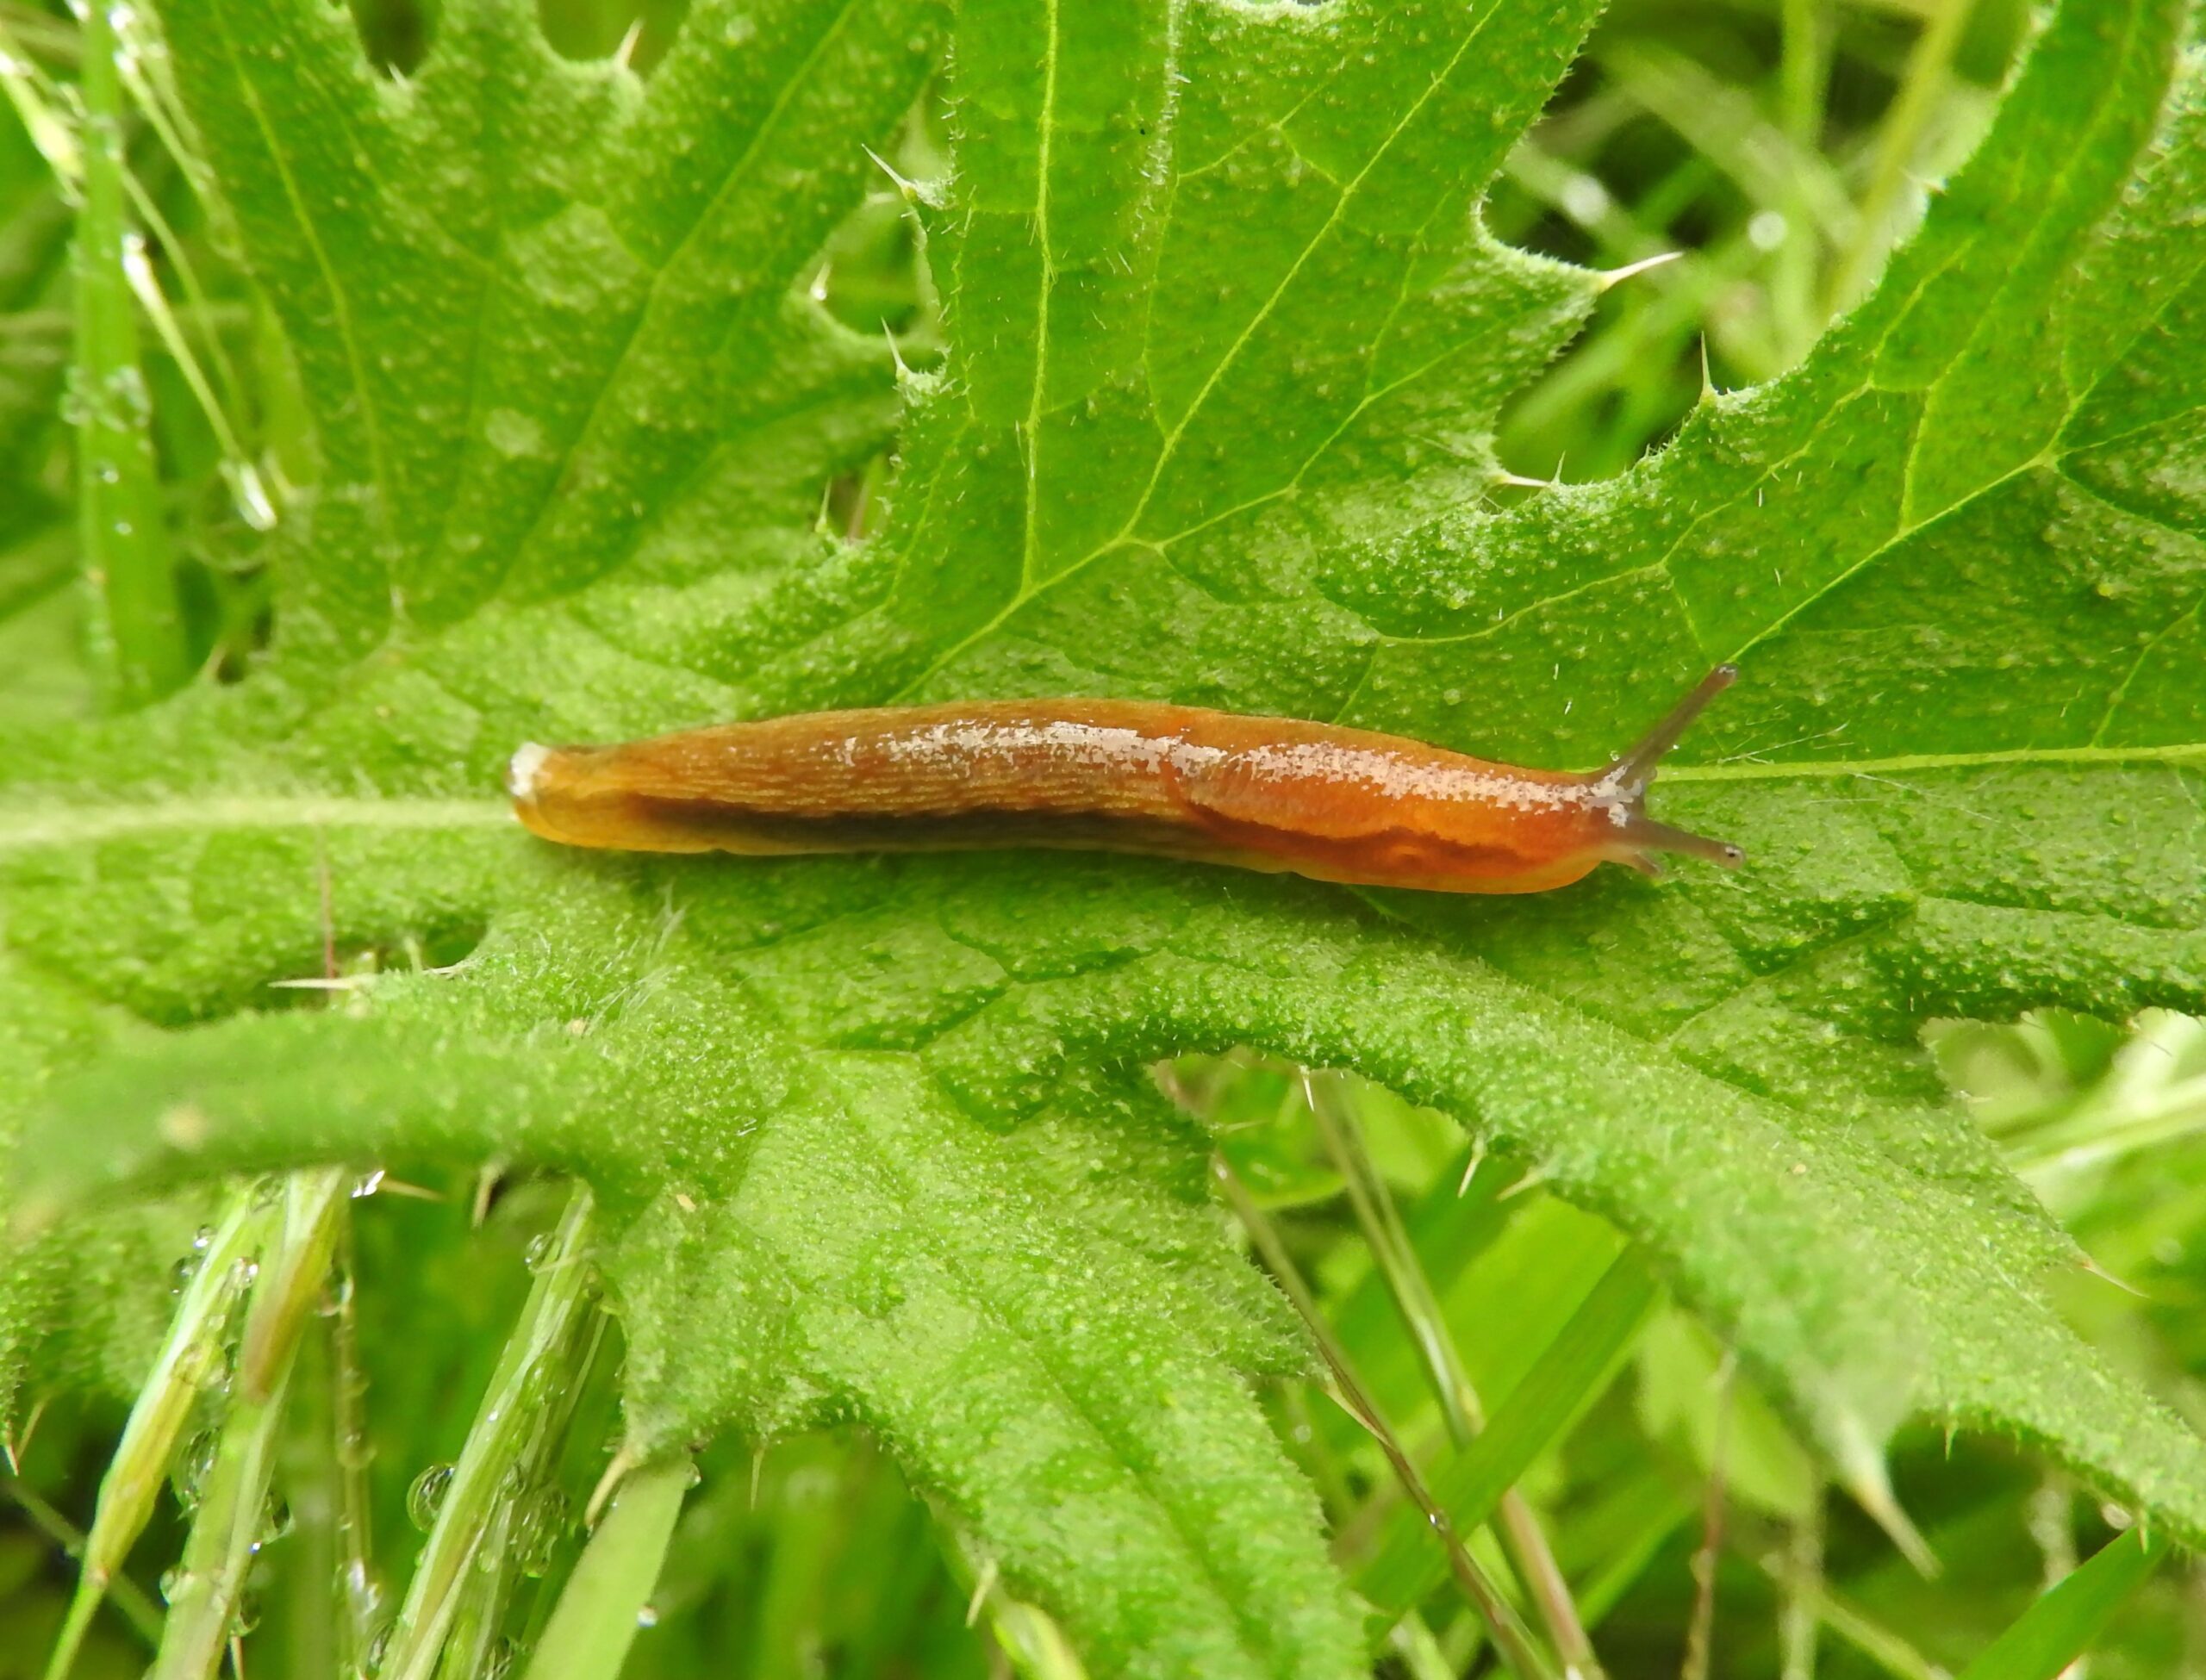 Slug sliding across a leaf from left to right.